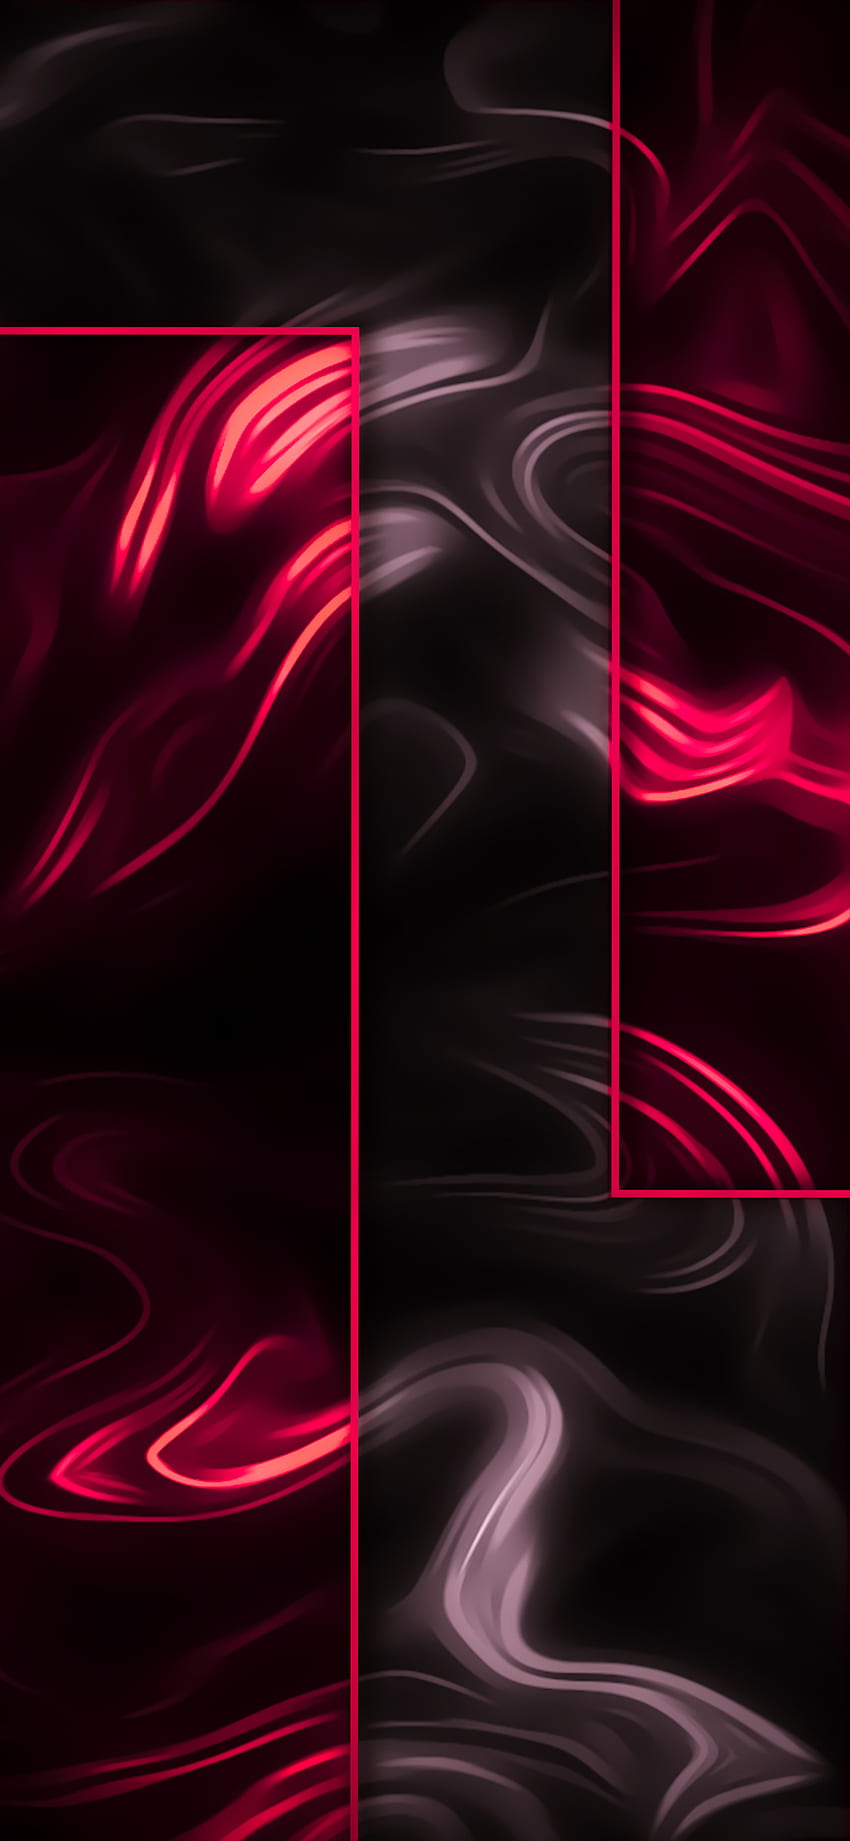 A black and red wallpaper with abstract designs - Magenta